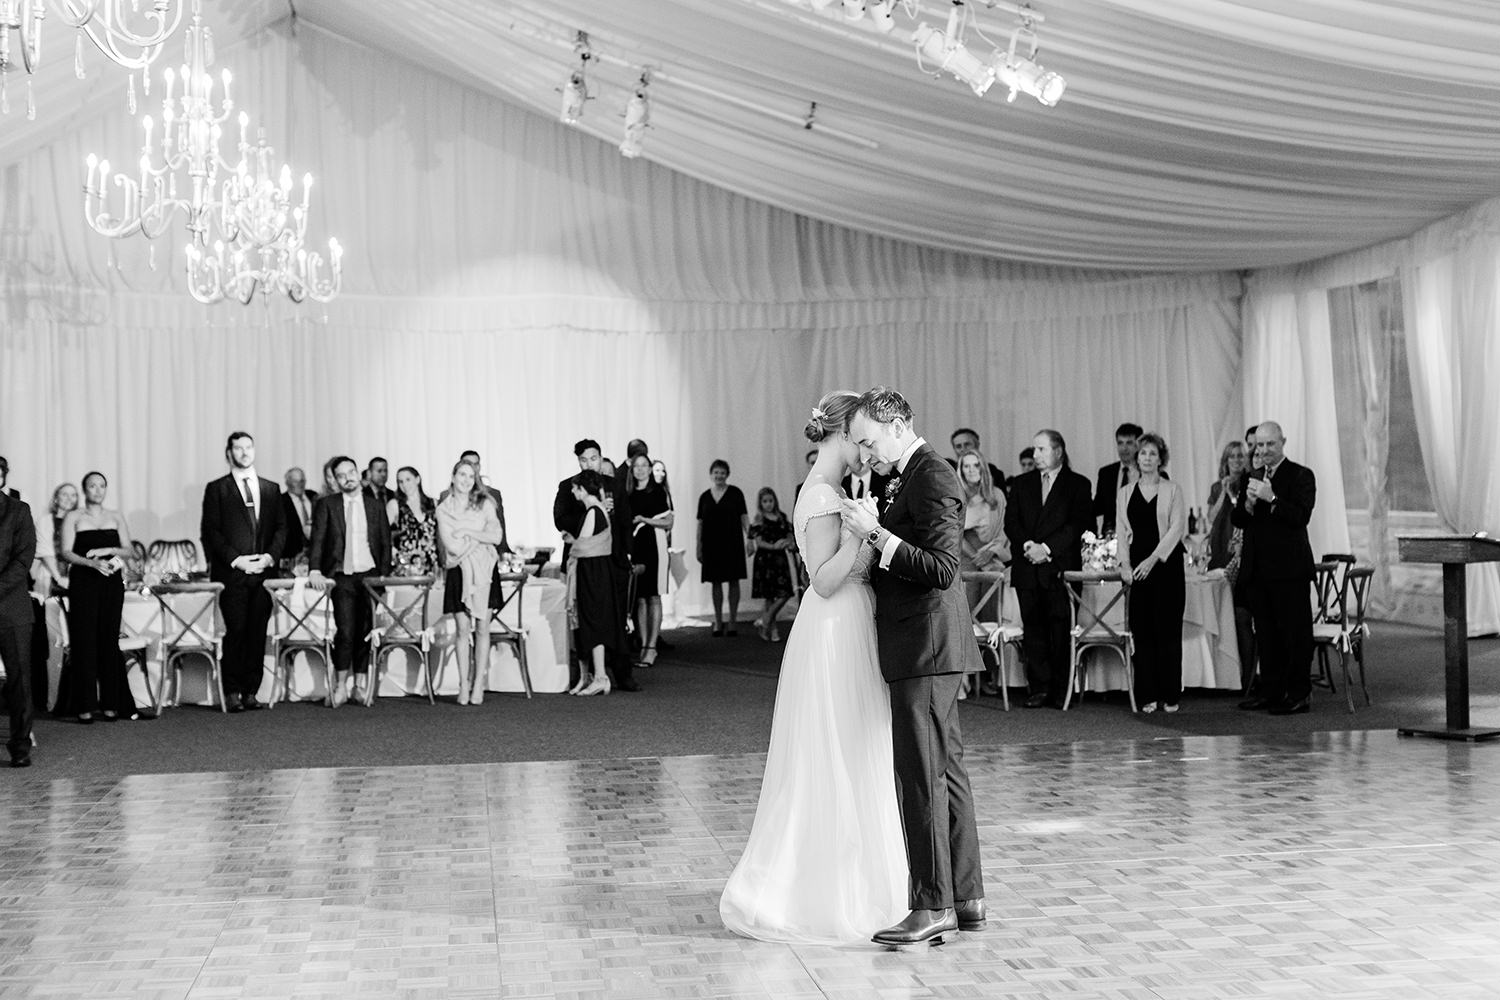 Newly married couple dancing at Sleepy Hollow Country Club wedding reception